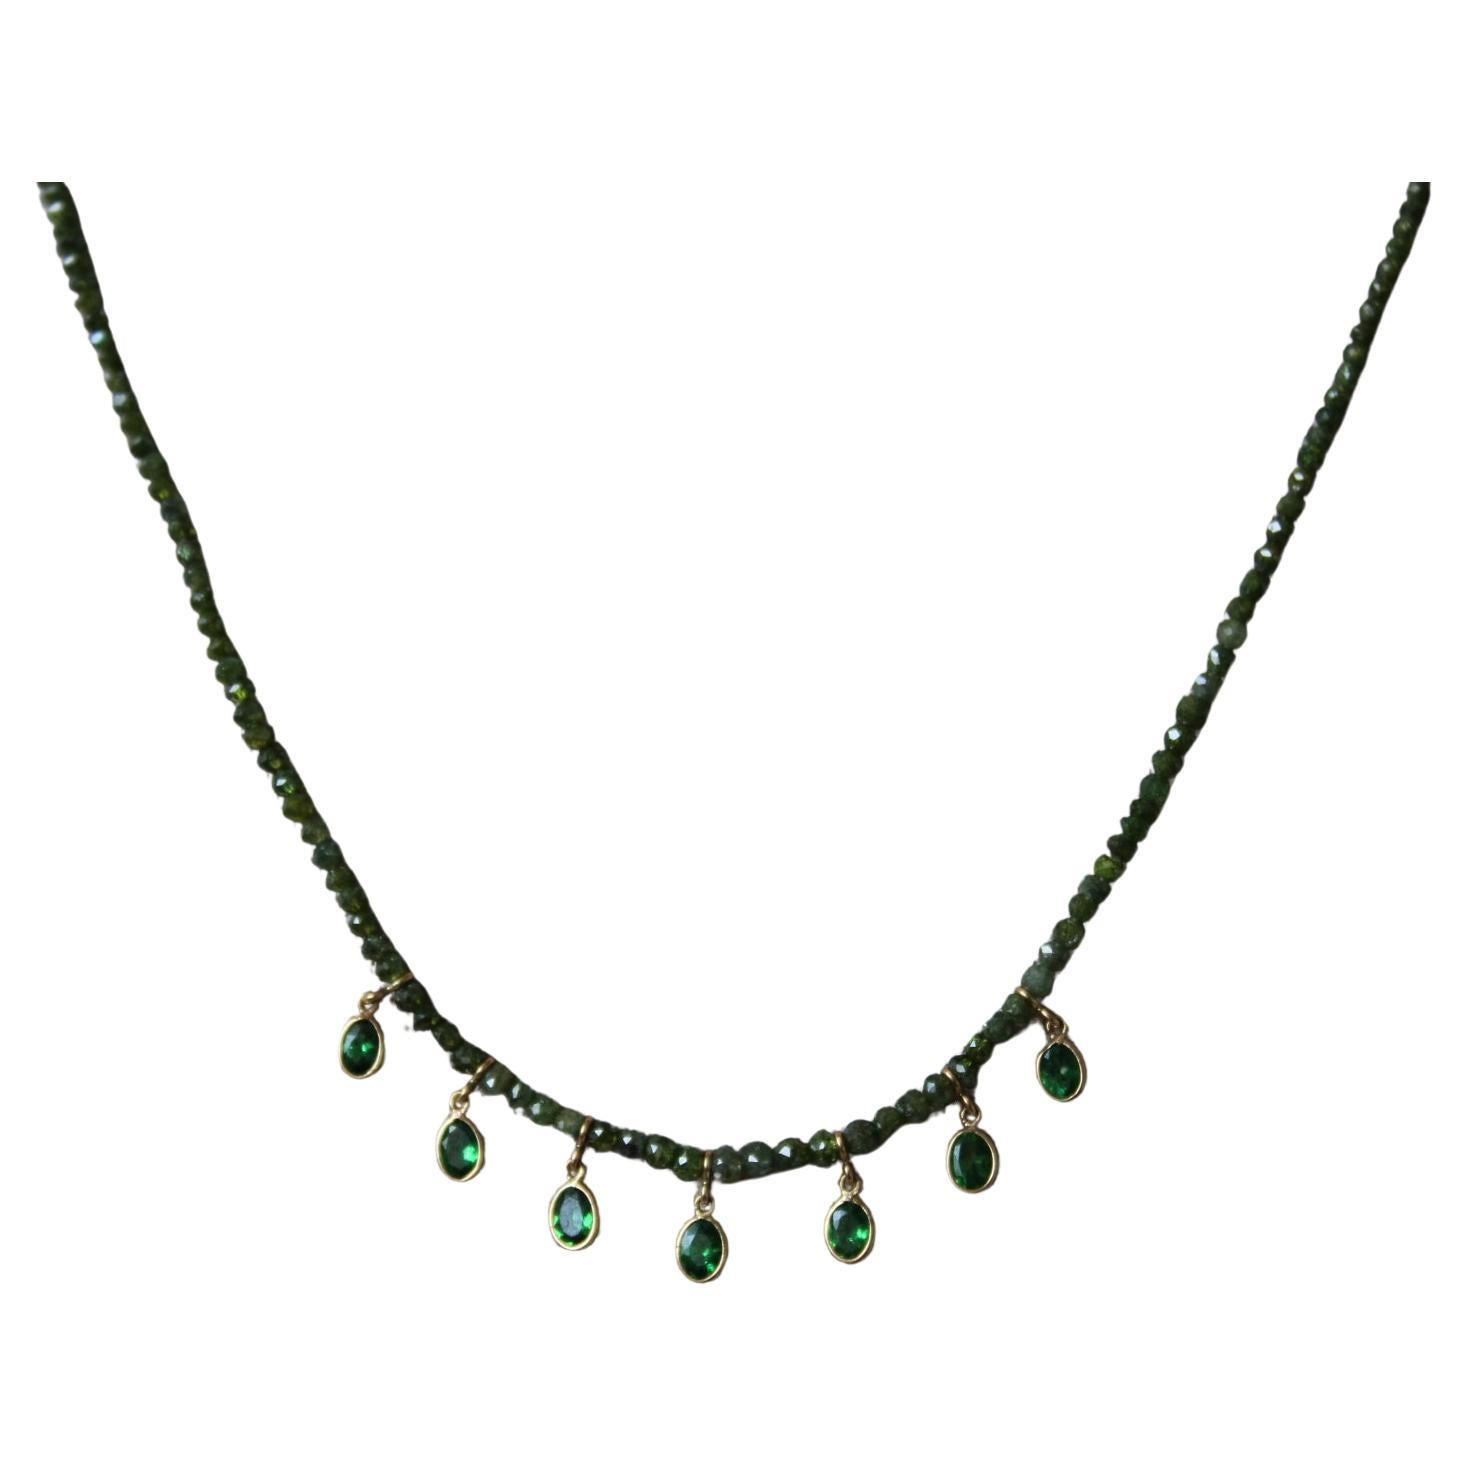 This stunning diamond bead strand necklace is truly unique. Comprised of 17.22 carats of diamond beads and 18K gold, this chain is also adorned by 1.09 carats of seven hunter green Tsavorite Pears. This diamond beads create sparkle with every move